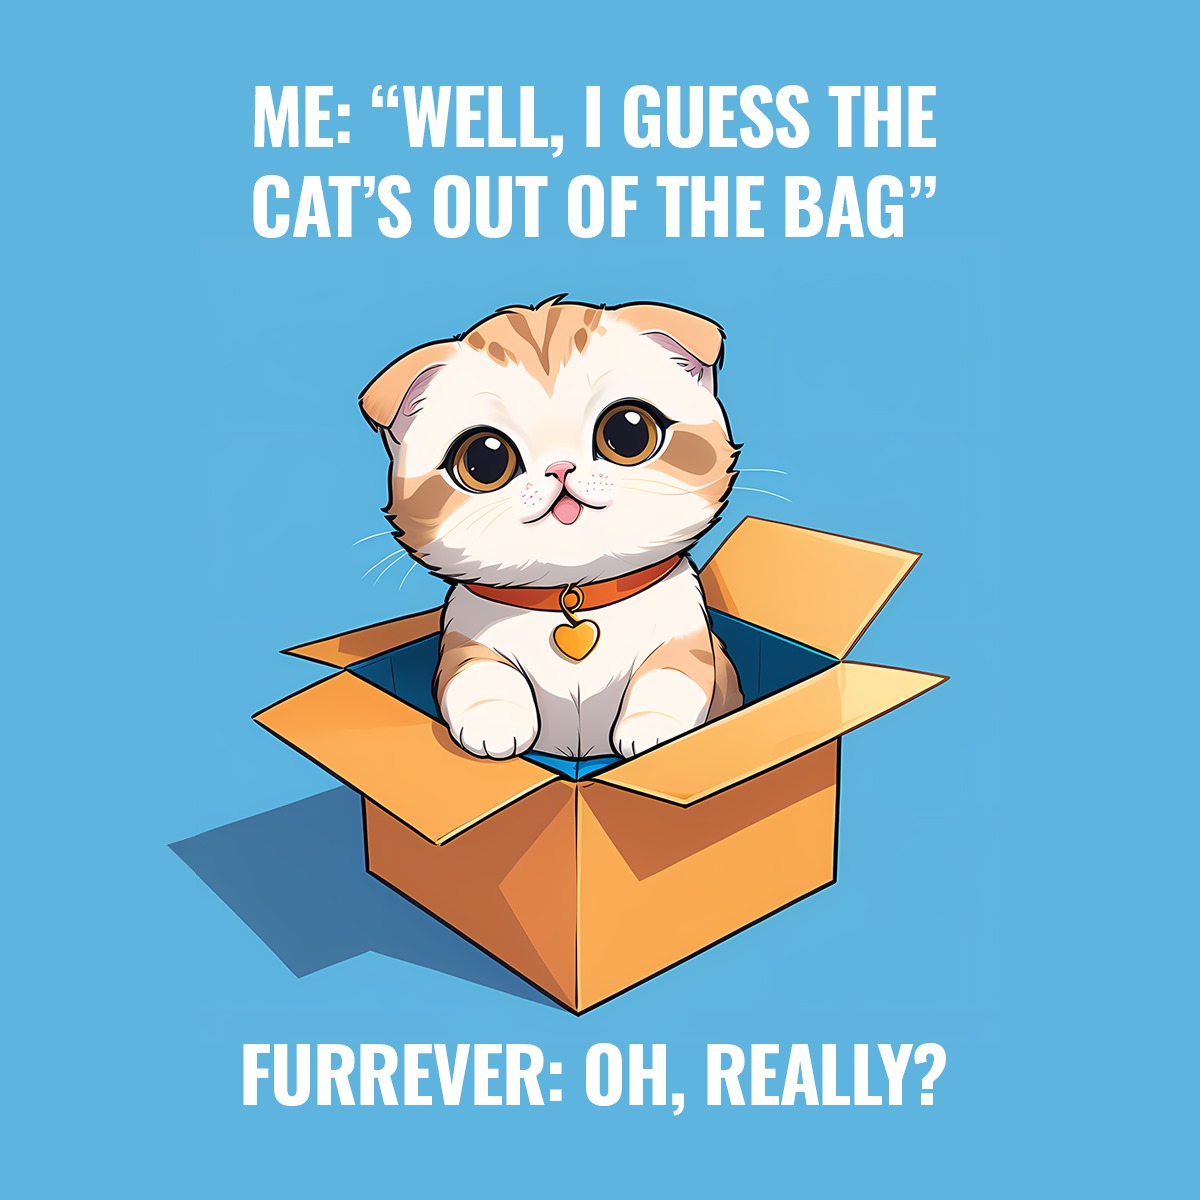 ME: 'WELL, I GUESS THE CAT'S OUT OF THE BAG' FURREVER: OH, REALLY?